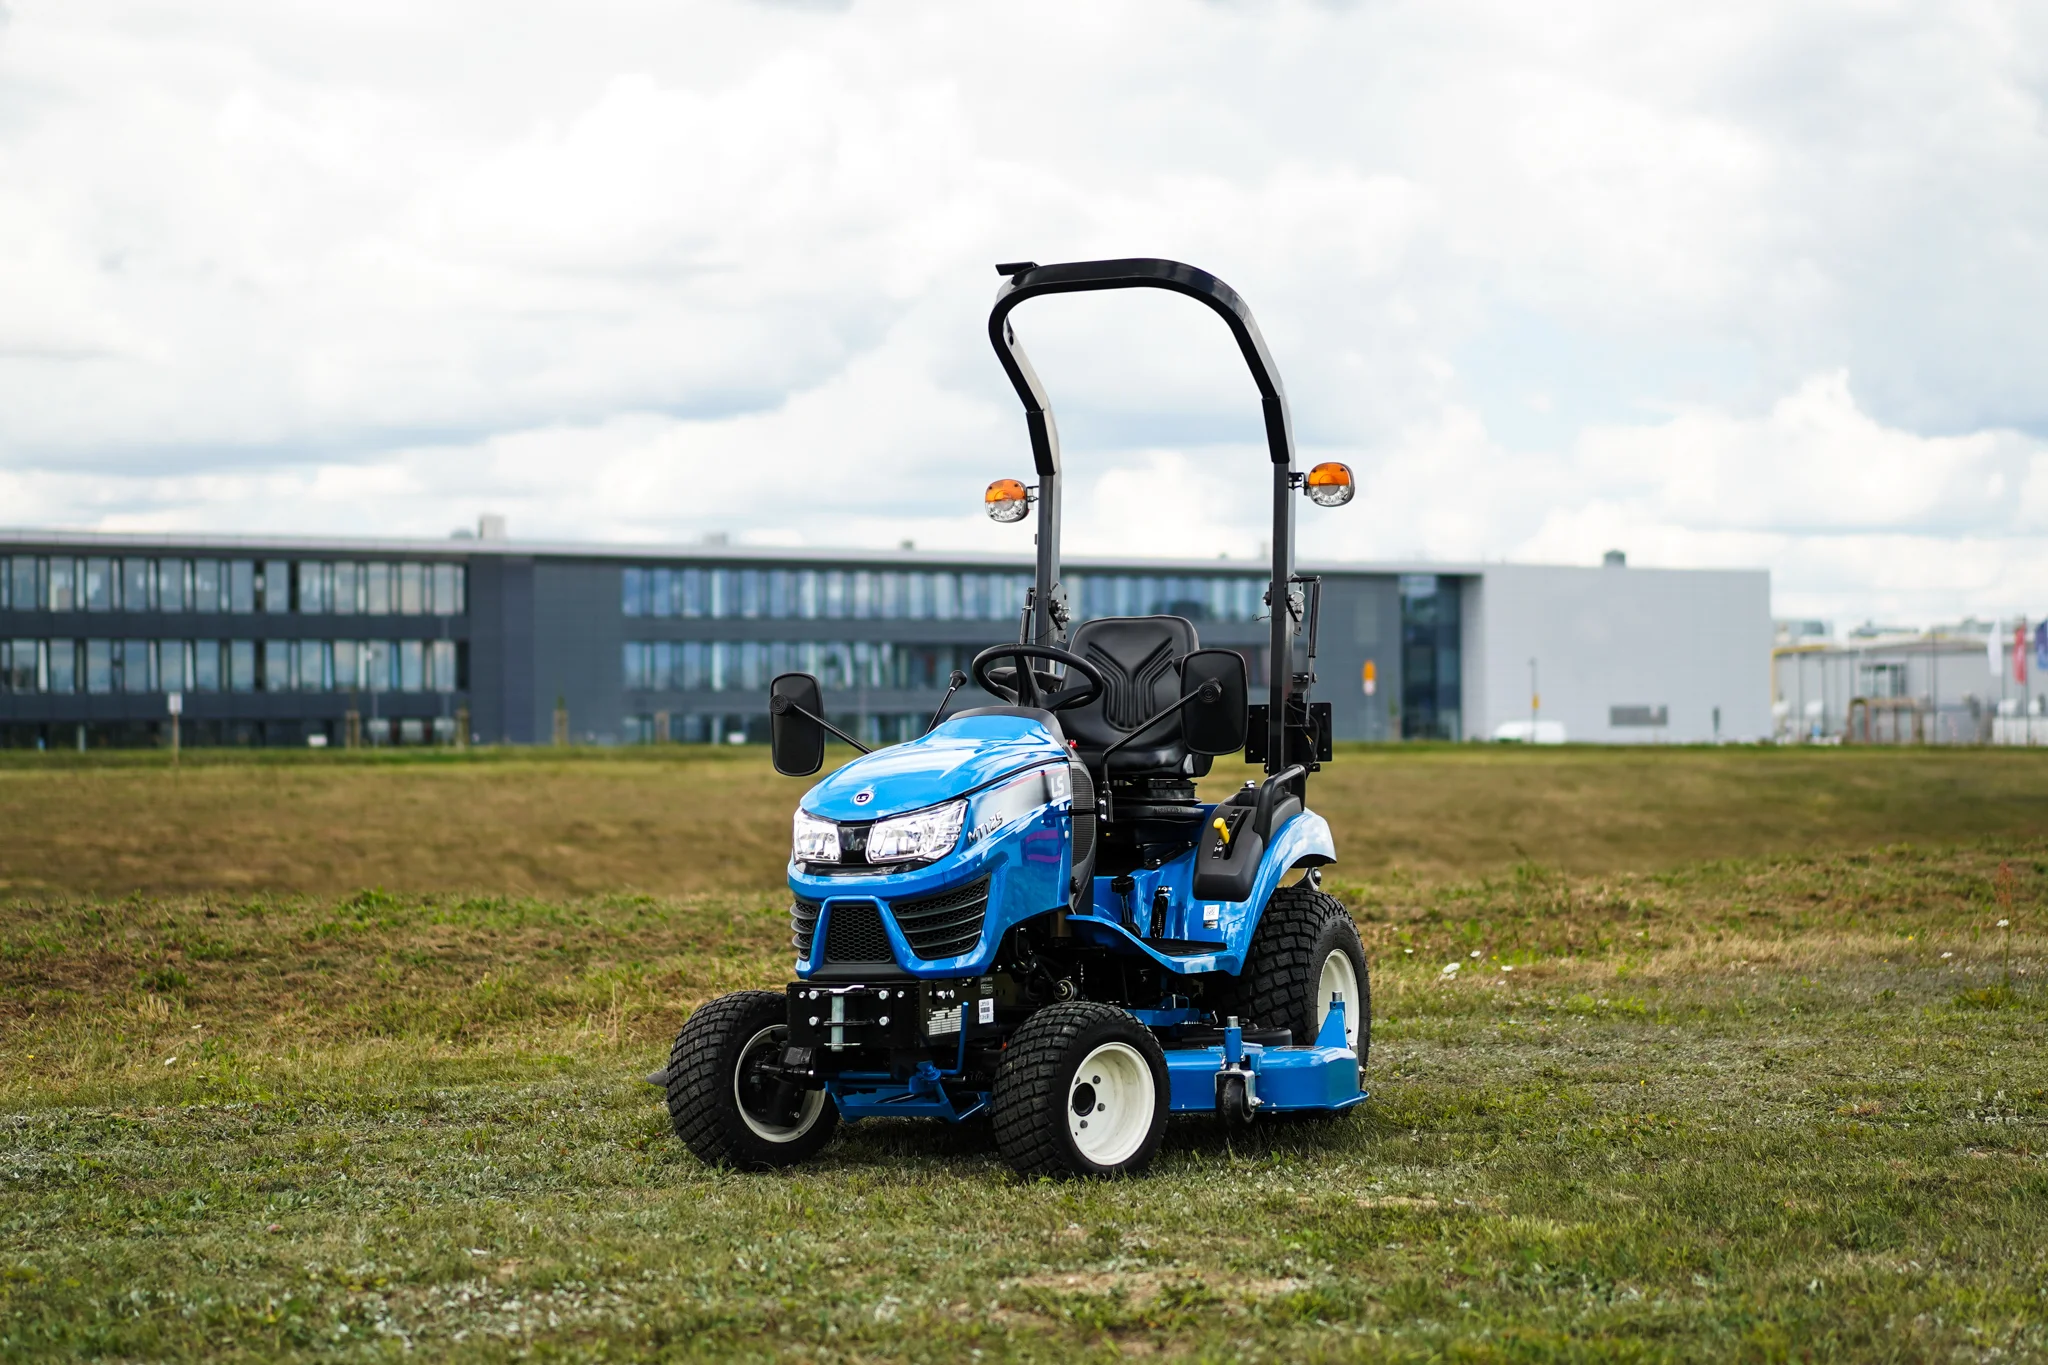 Do you need a lawn mower? Find the perfect mower model for you!